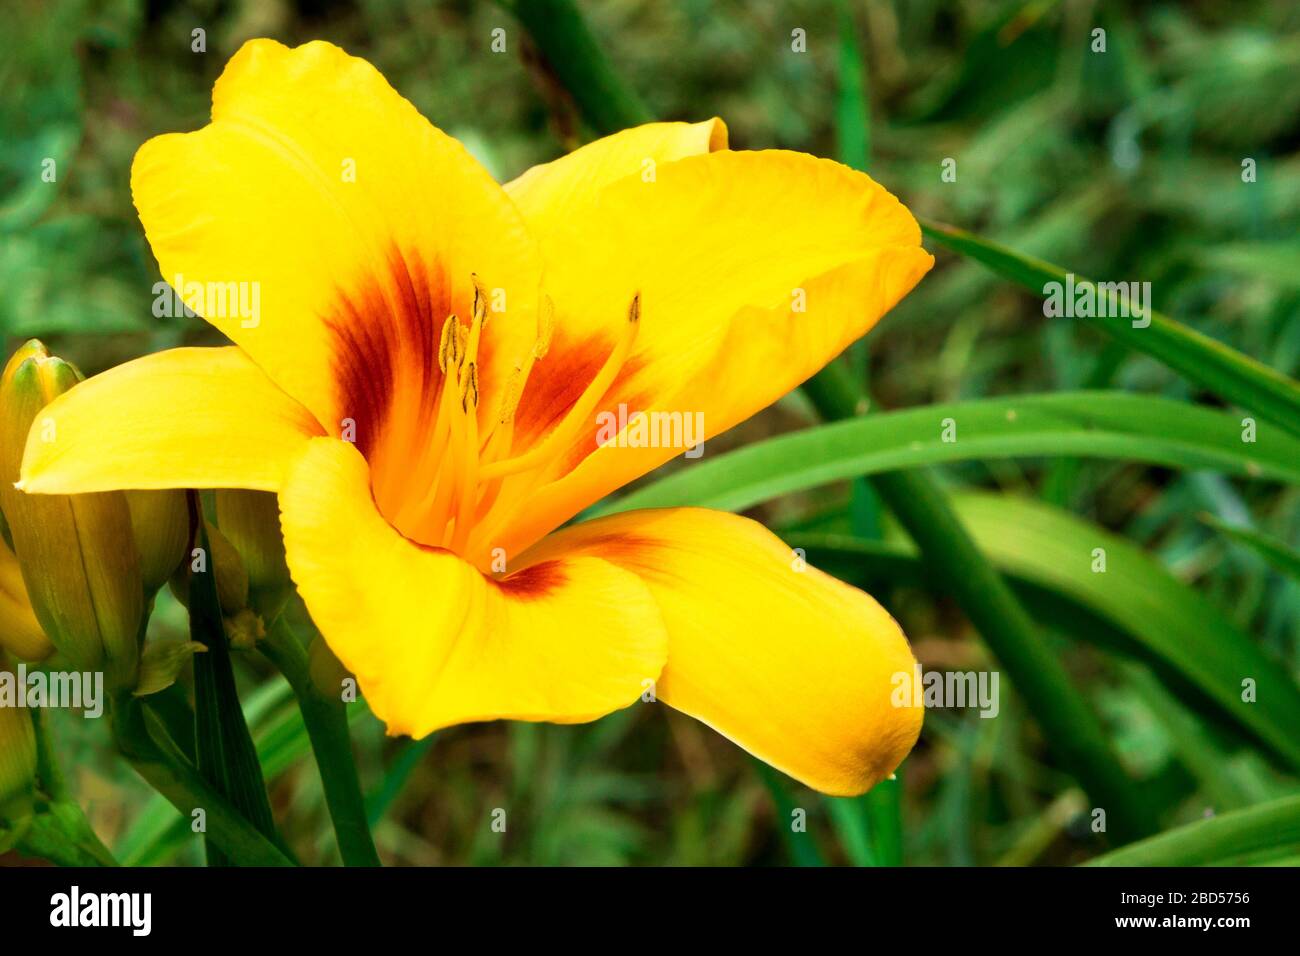 Beautiful Lily flower on green leaves background. Lilium longiflorum flowers in the garden. Background texture plant fire lily with orange buds. Stock Photo